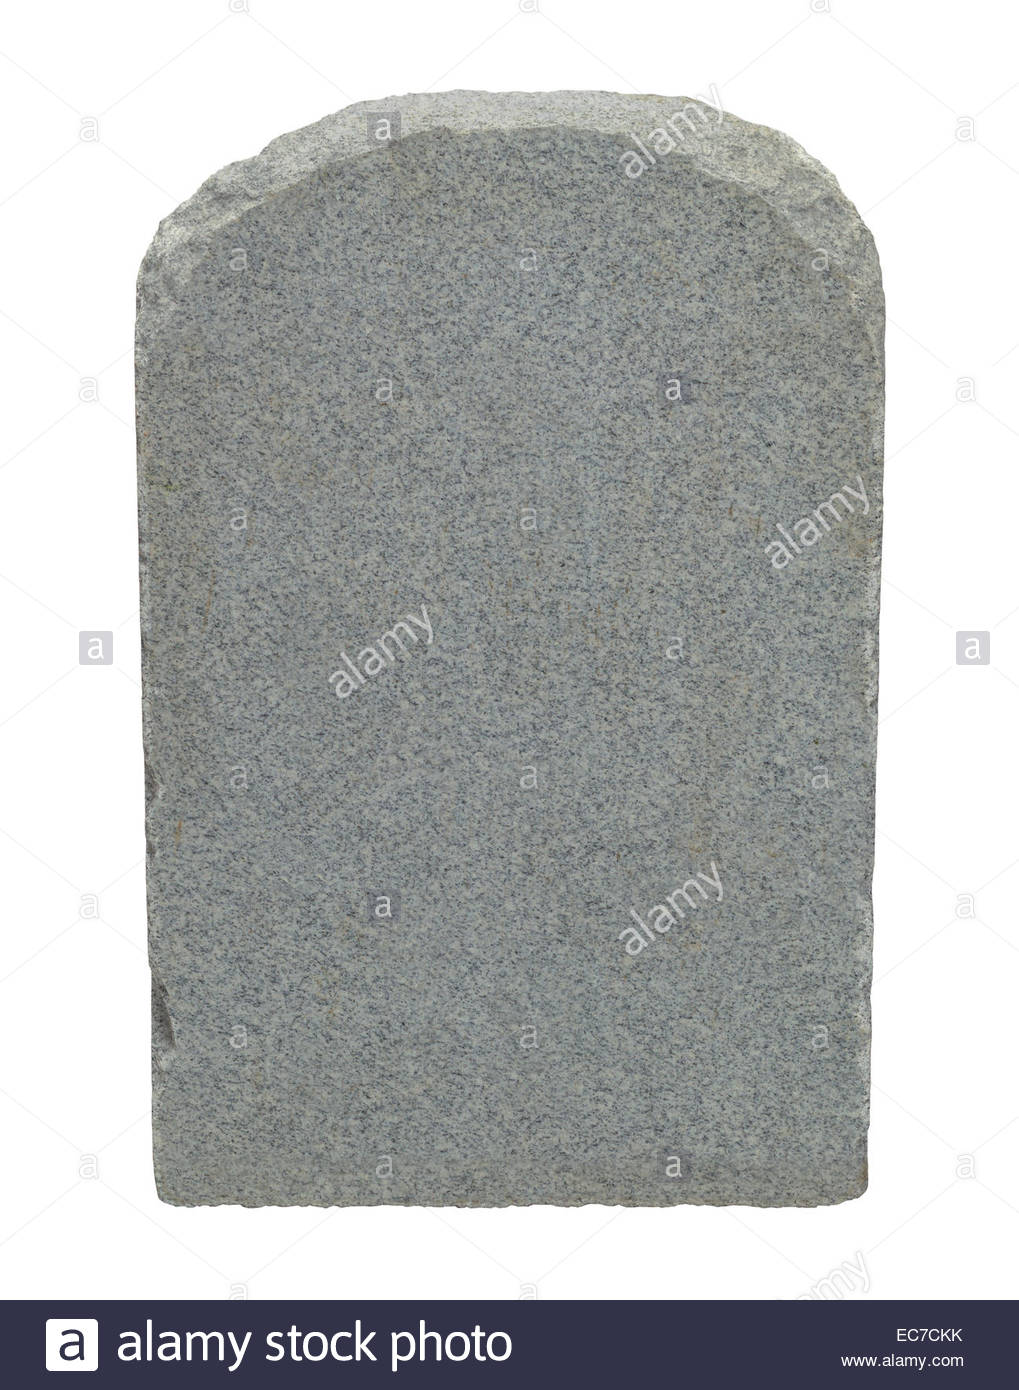 Tombstone With Copy Space Isolated On White Background Stock Photo